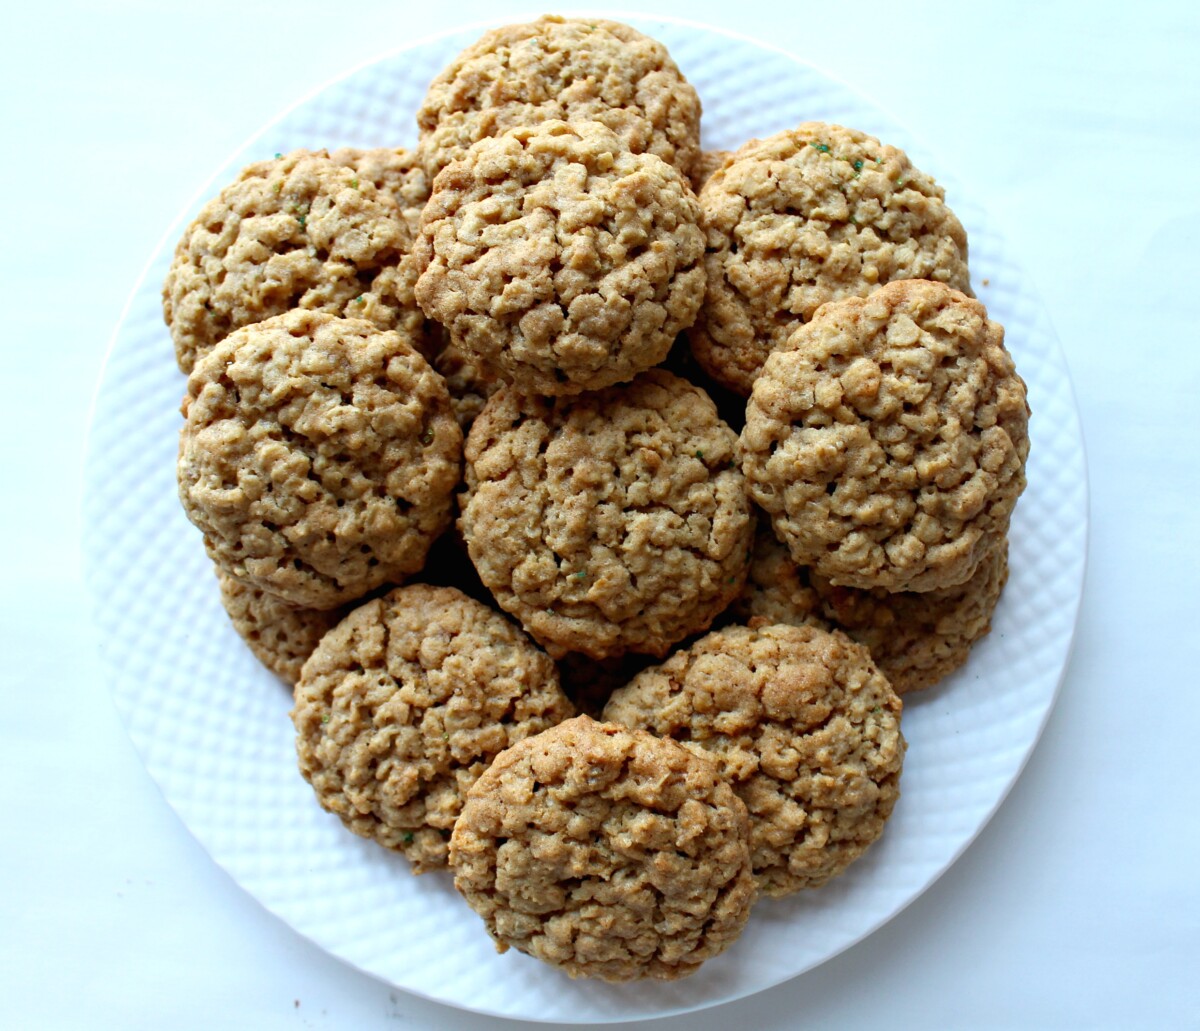 A pile of cookies on a white serving plate.